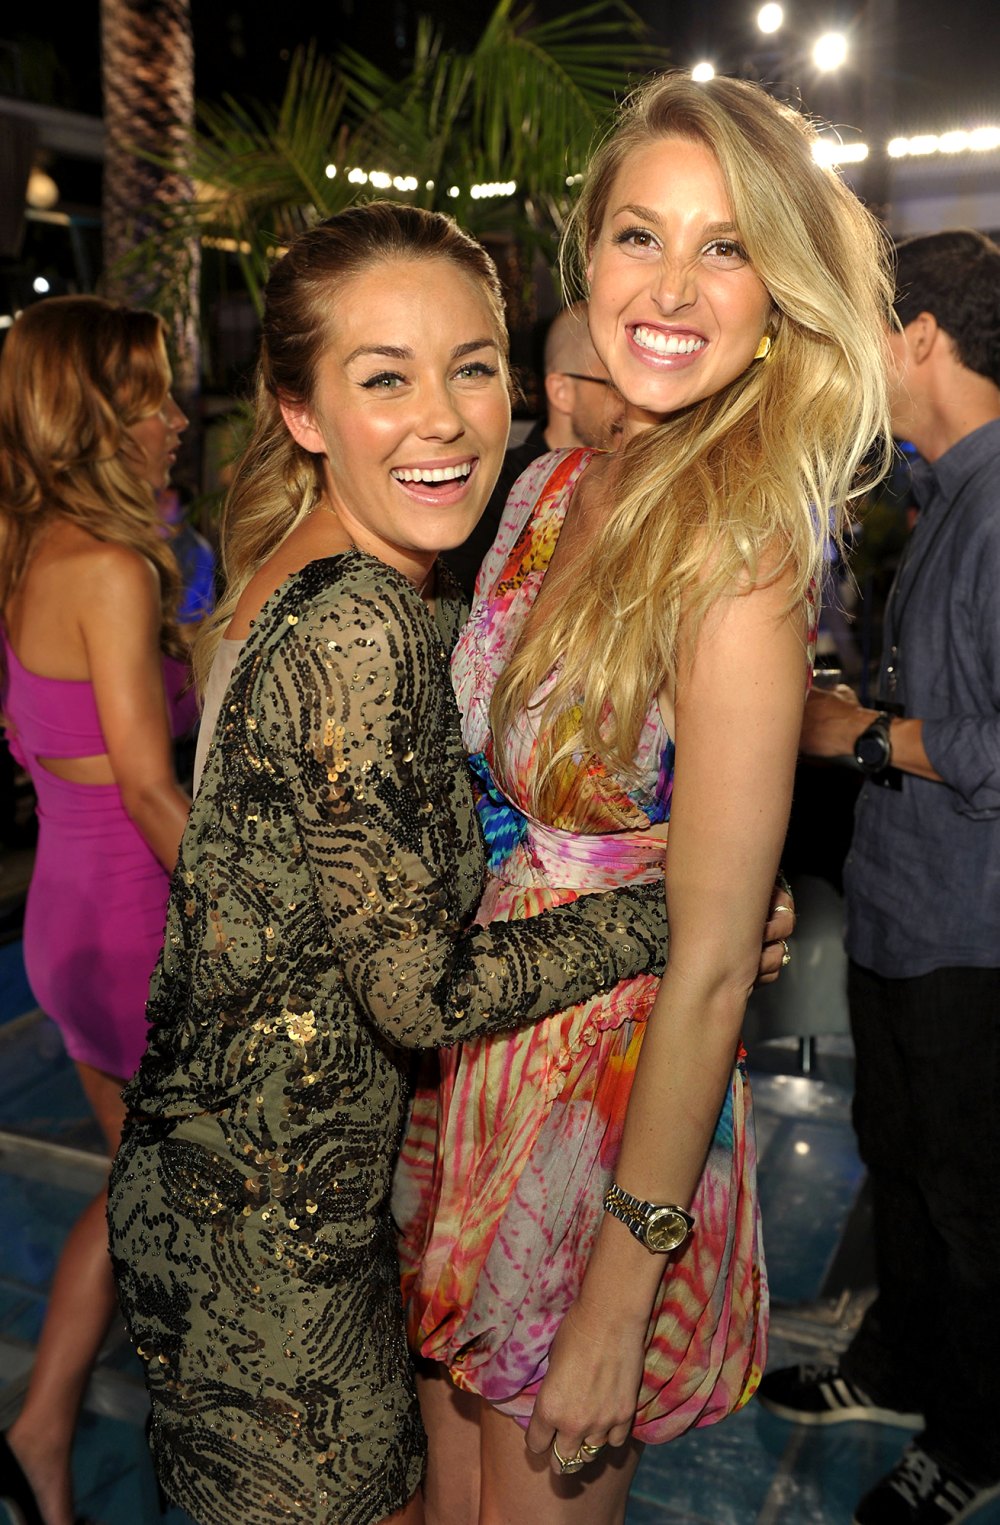 Whitney Port’s Reality TV Revelations: Where She Stands With Lauren Conrad After 'The Hills' and More